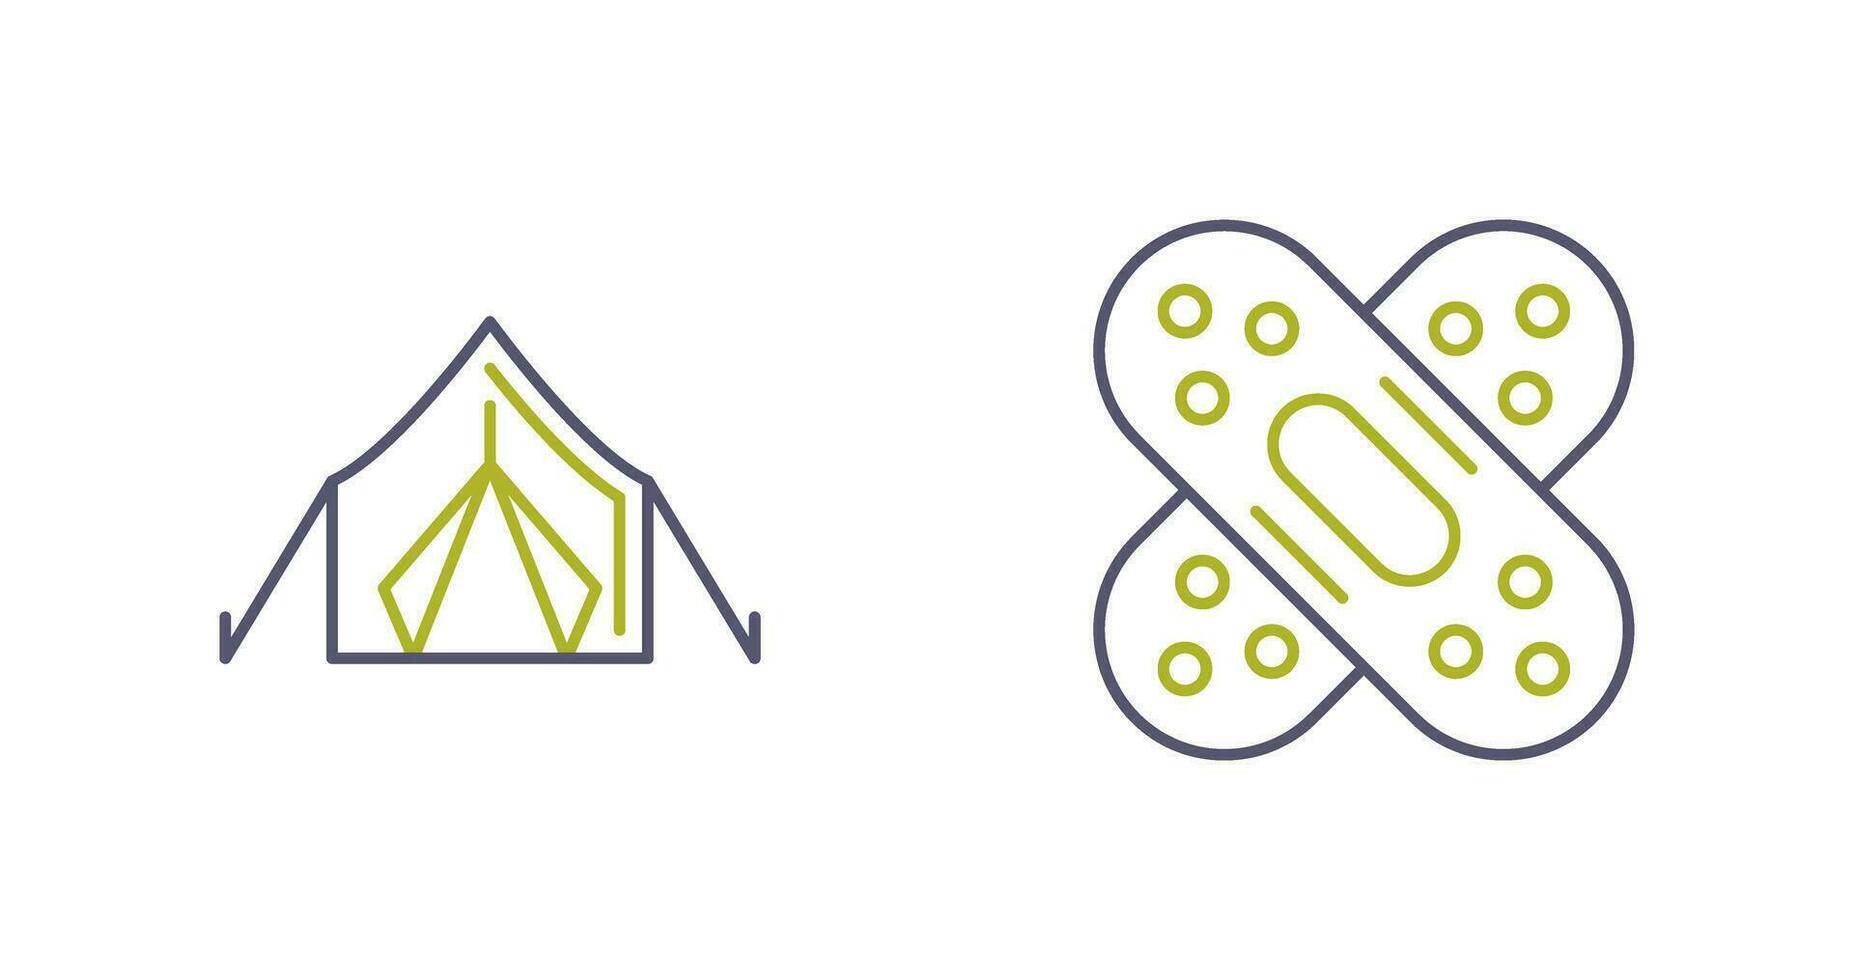 Tent and Bandage Icon vector